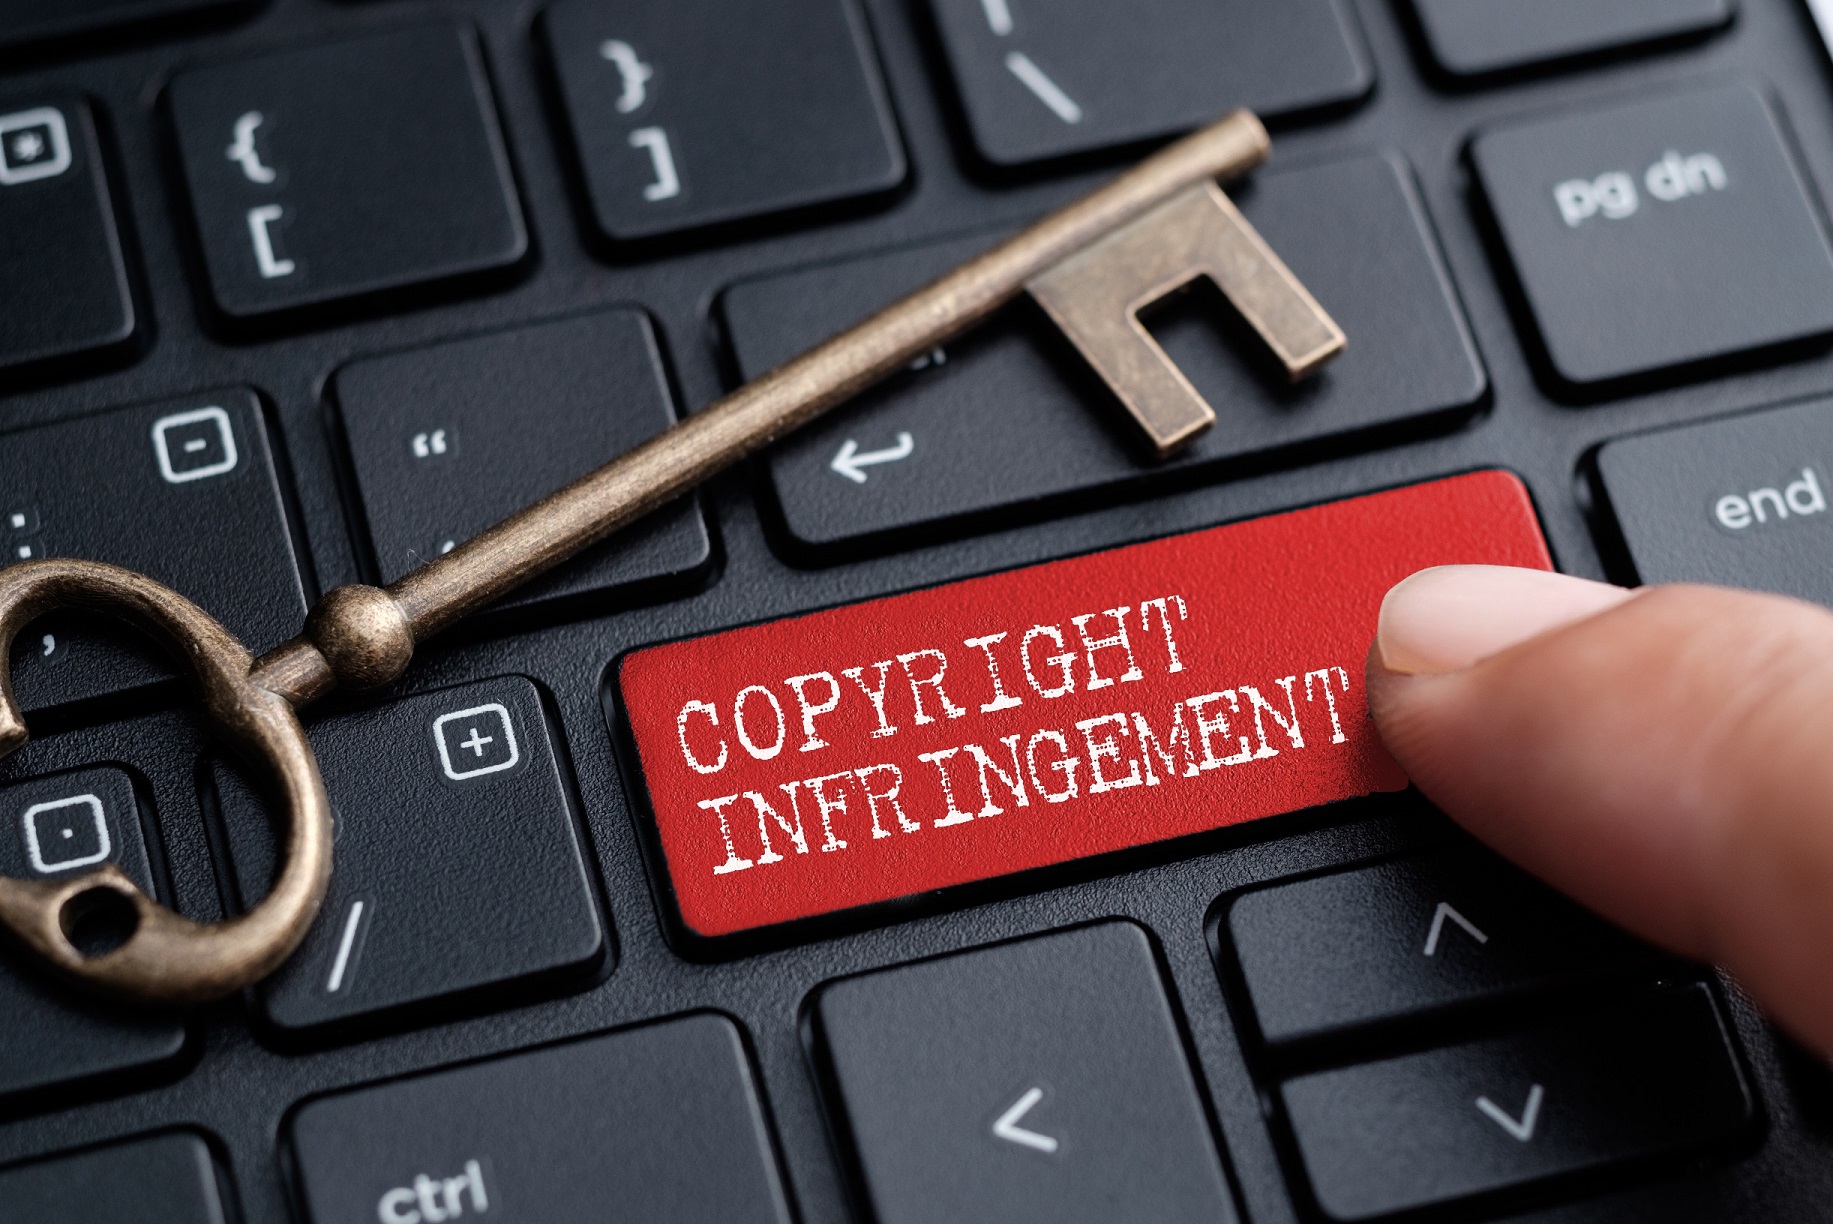 Second Time’s a Charm: Preliminary Discovery From ISPs to Unmask Copyright Infringers